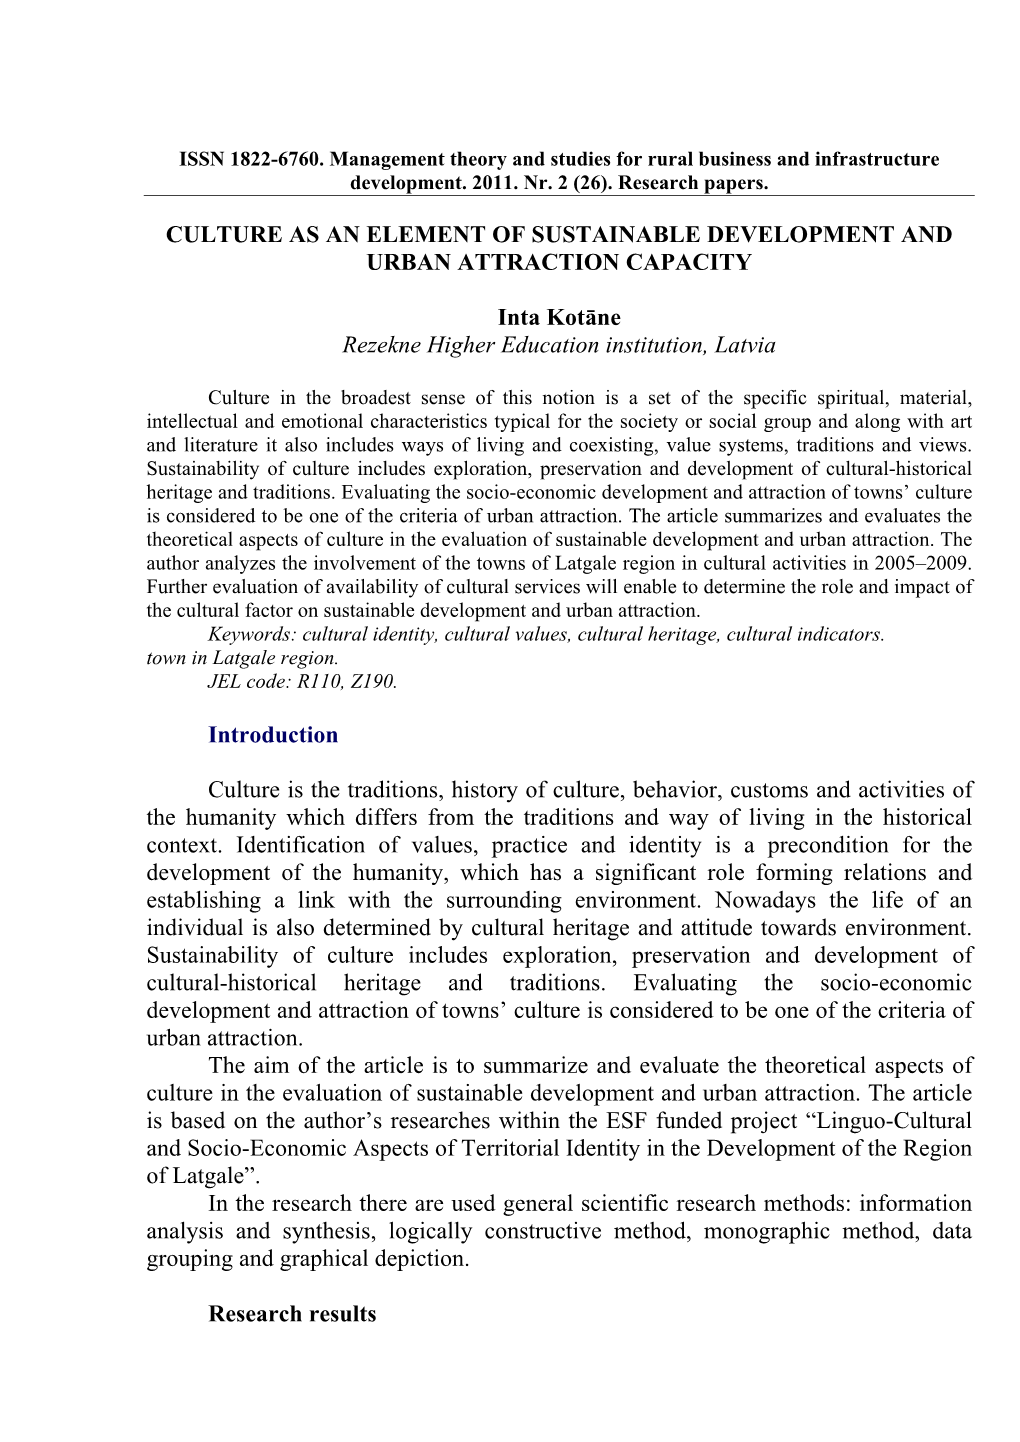 CULTURE AS an ELEMENT of SUSTAINABLE DEVELOPMENT and URBAN ATTRACTION CAPACITY Inta Kotāne Rezekne Higher Education Institution